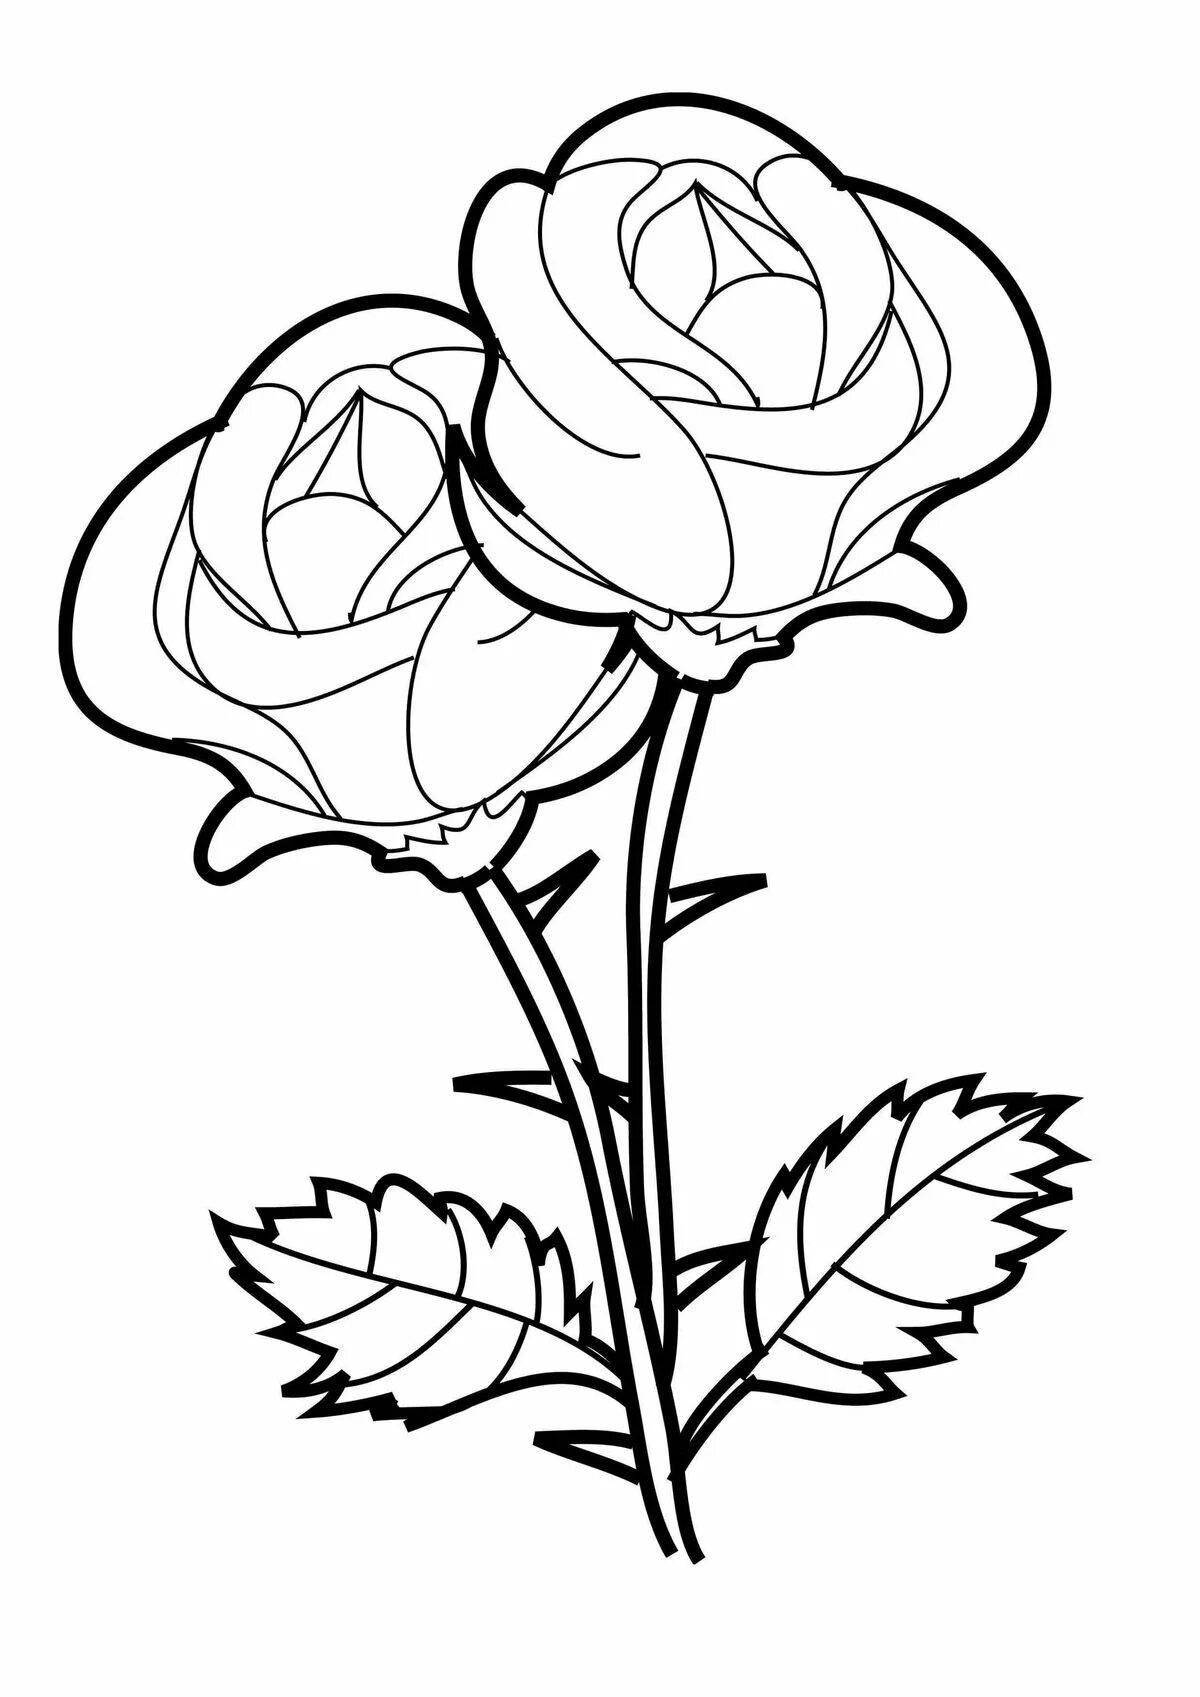 Festive rose coloring book for 5-6 year olds